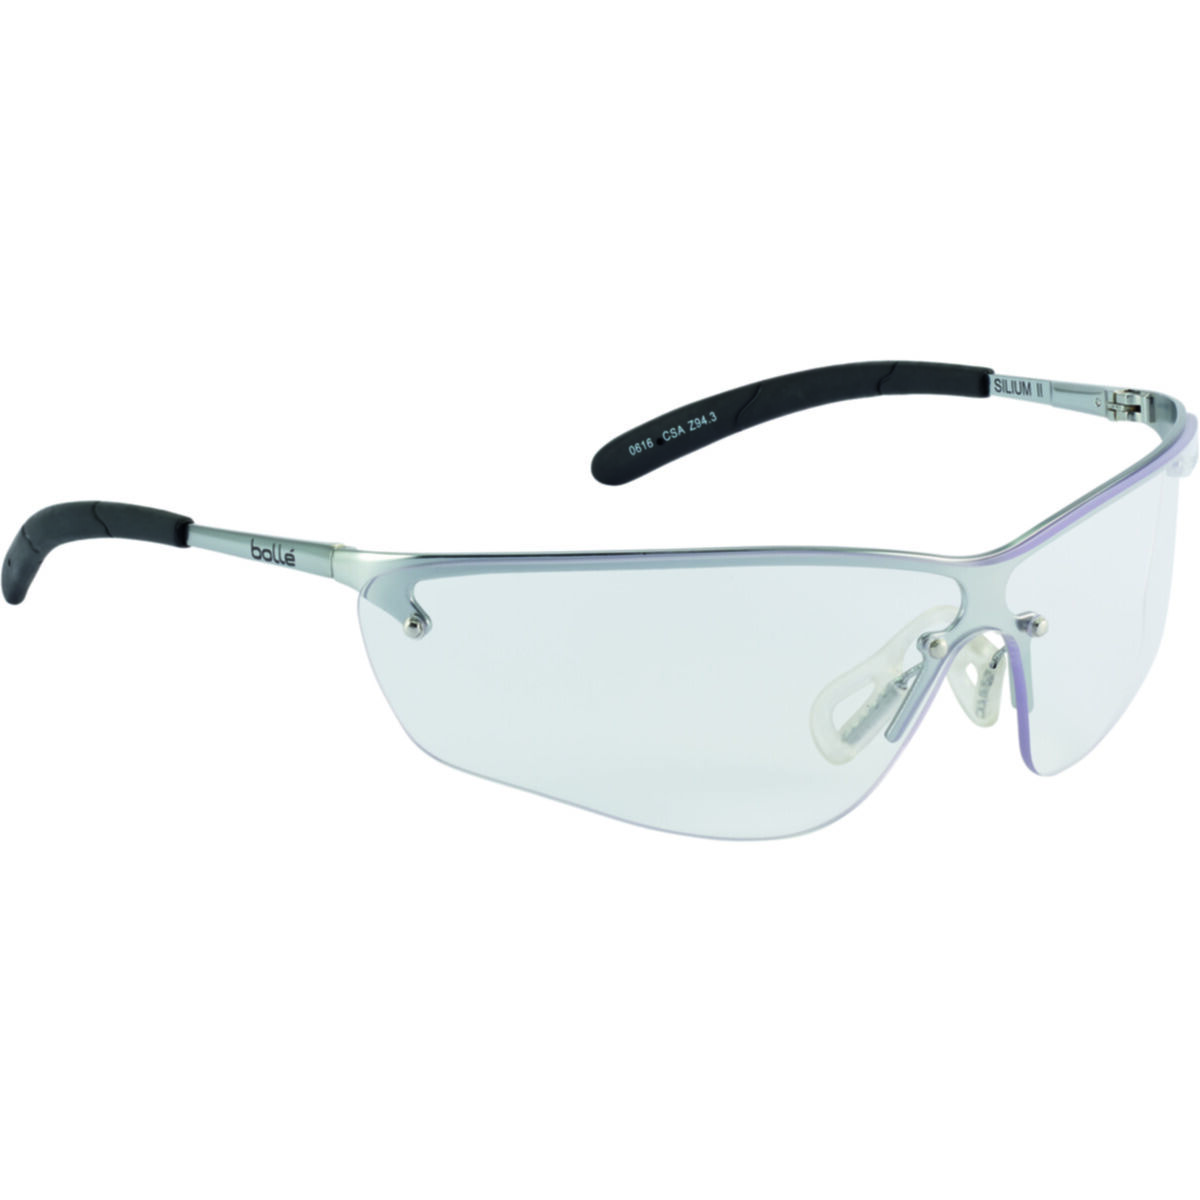 Clear Bolle BOLSILPSI Silium Safety Glasses 